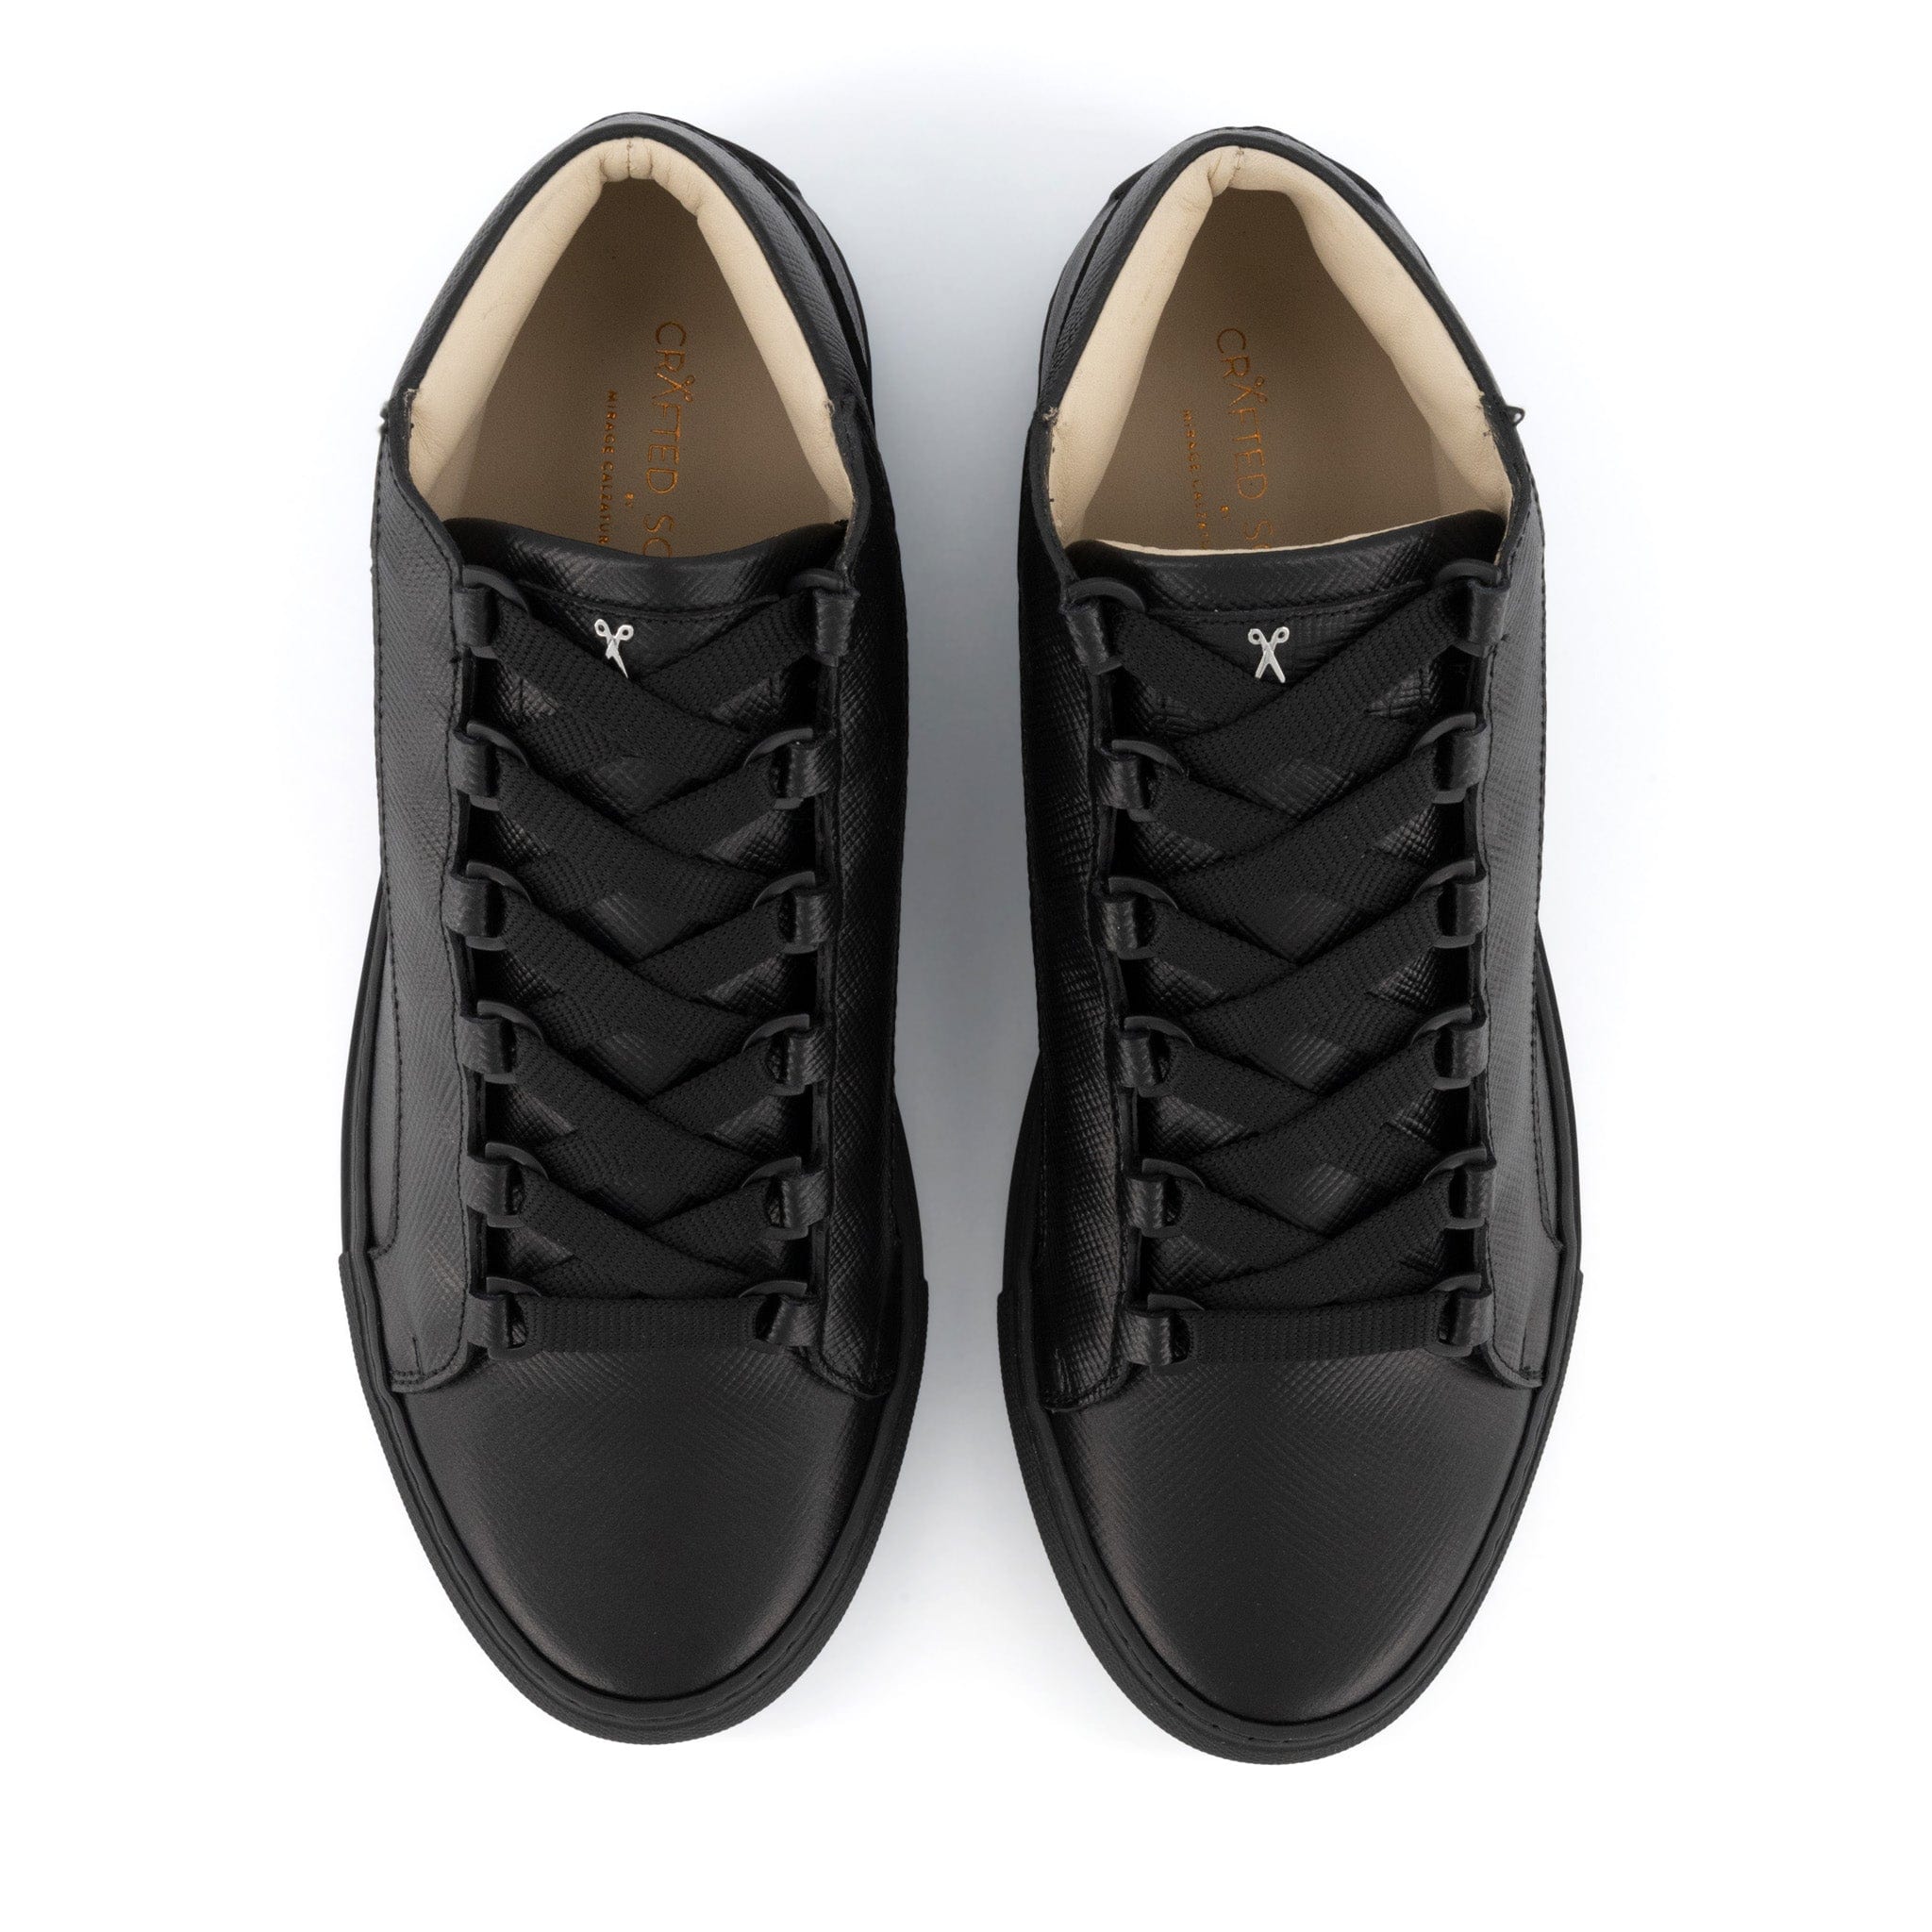 Rico Mid Sneaker | Black Saffiano Leather | Made in Italy